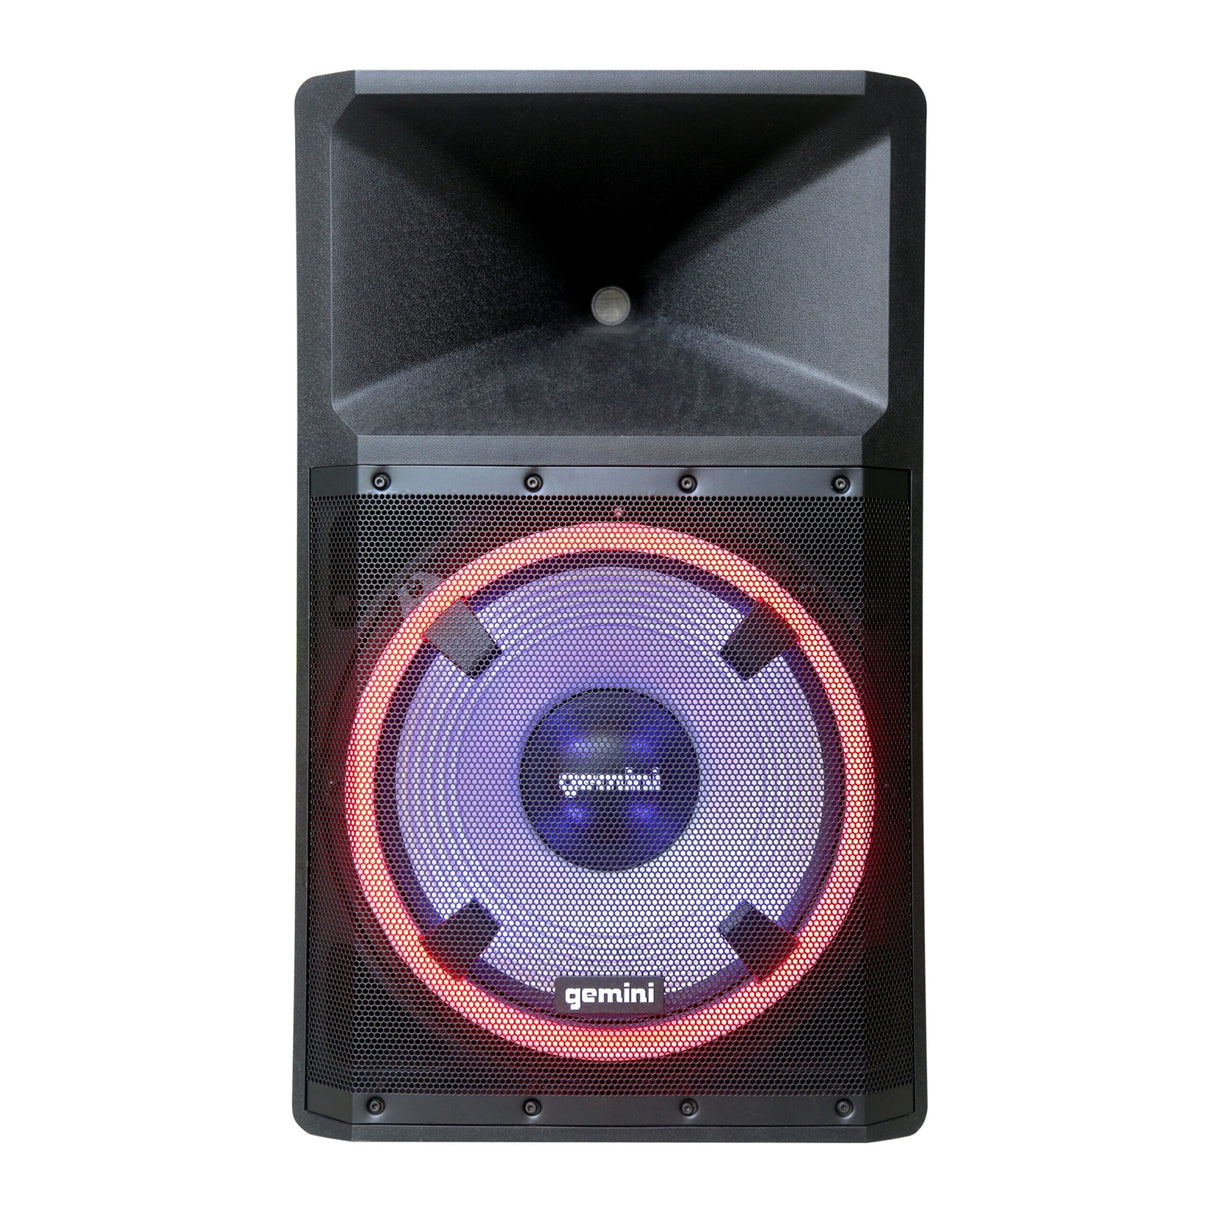 Gemini GSP-L2200PK Bluetooth 2200 Watt Speaker with Party Lights and Built-In Media Player